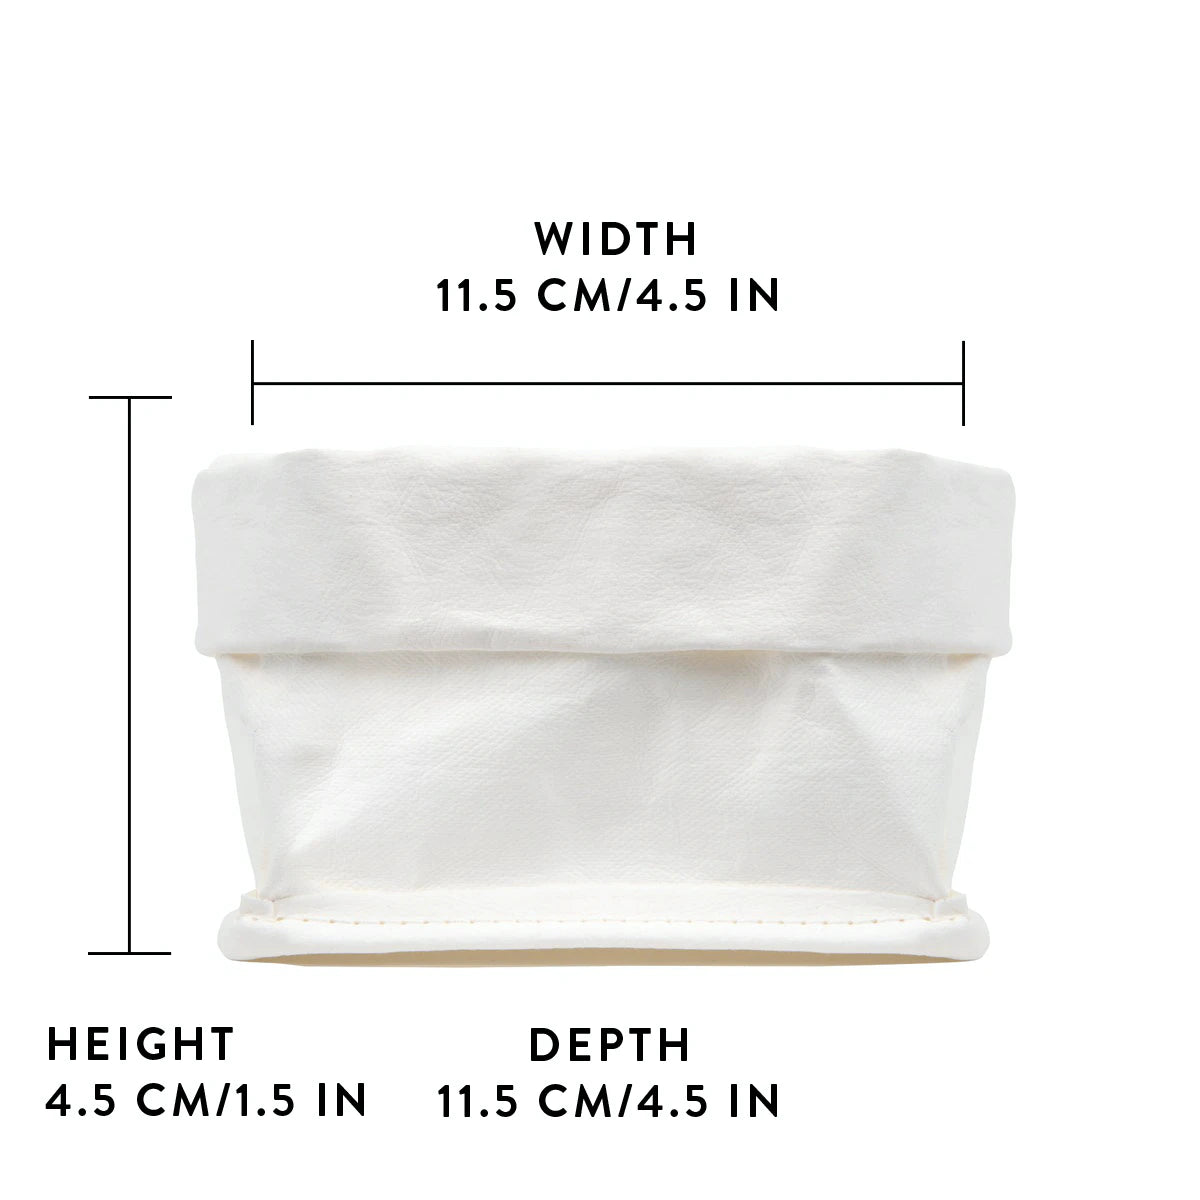 A washable paper roll-top tray is shown in white, with graphics displaying its size - 11.5cm wide x 4.5 cm high x 11.5cm deep.